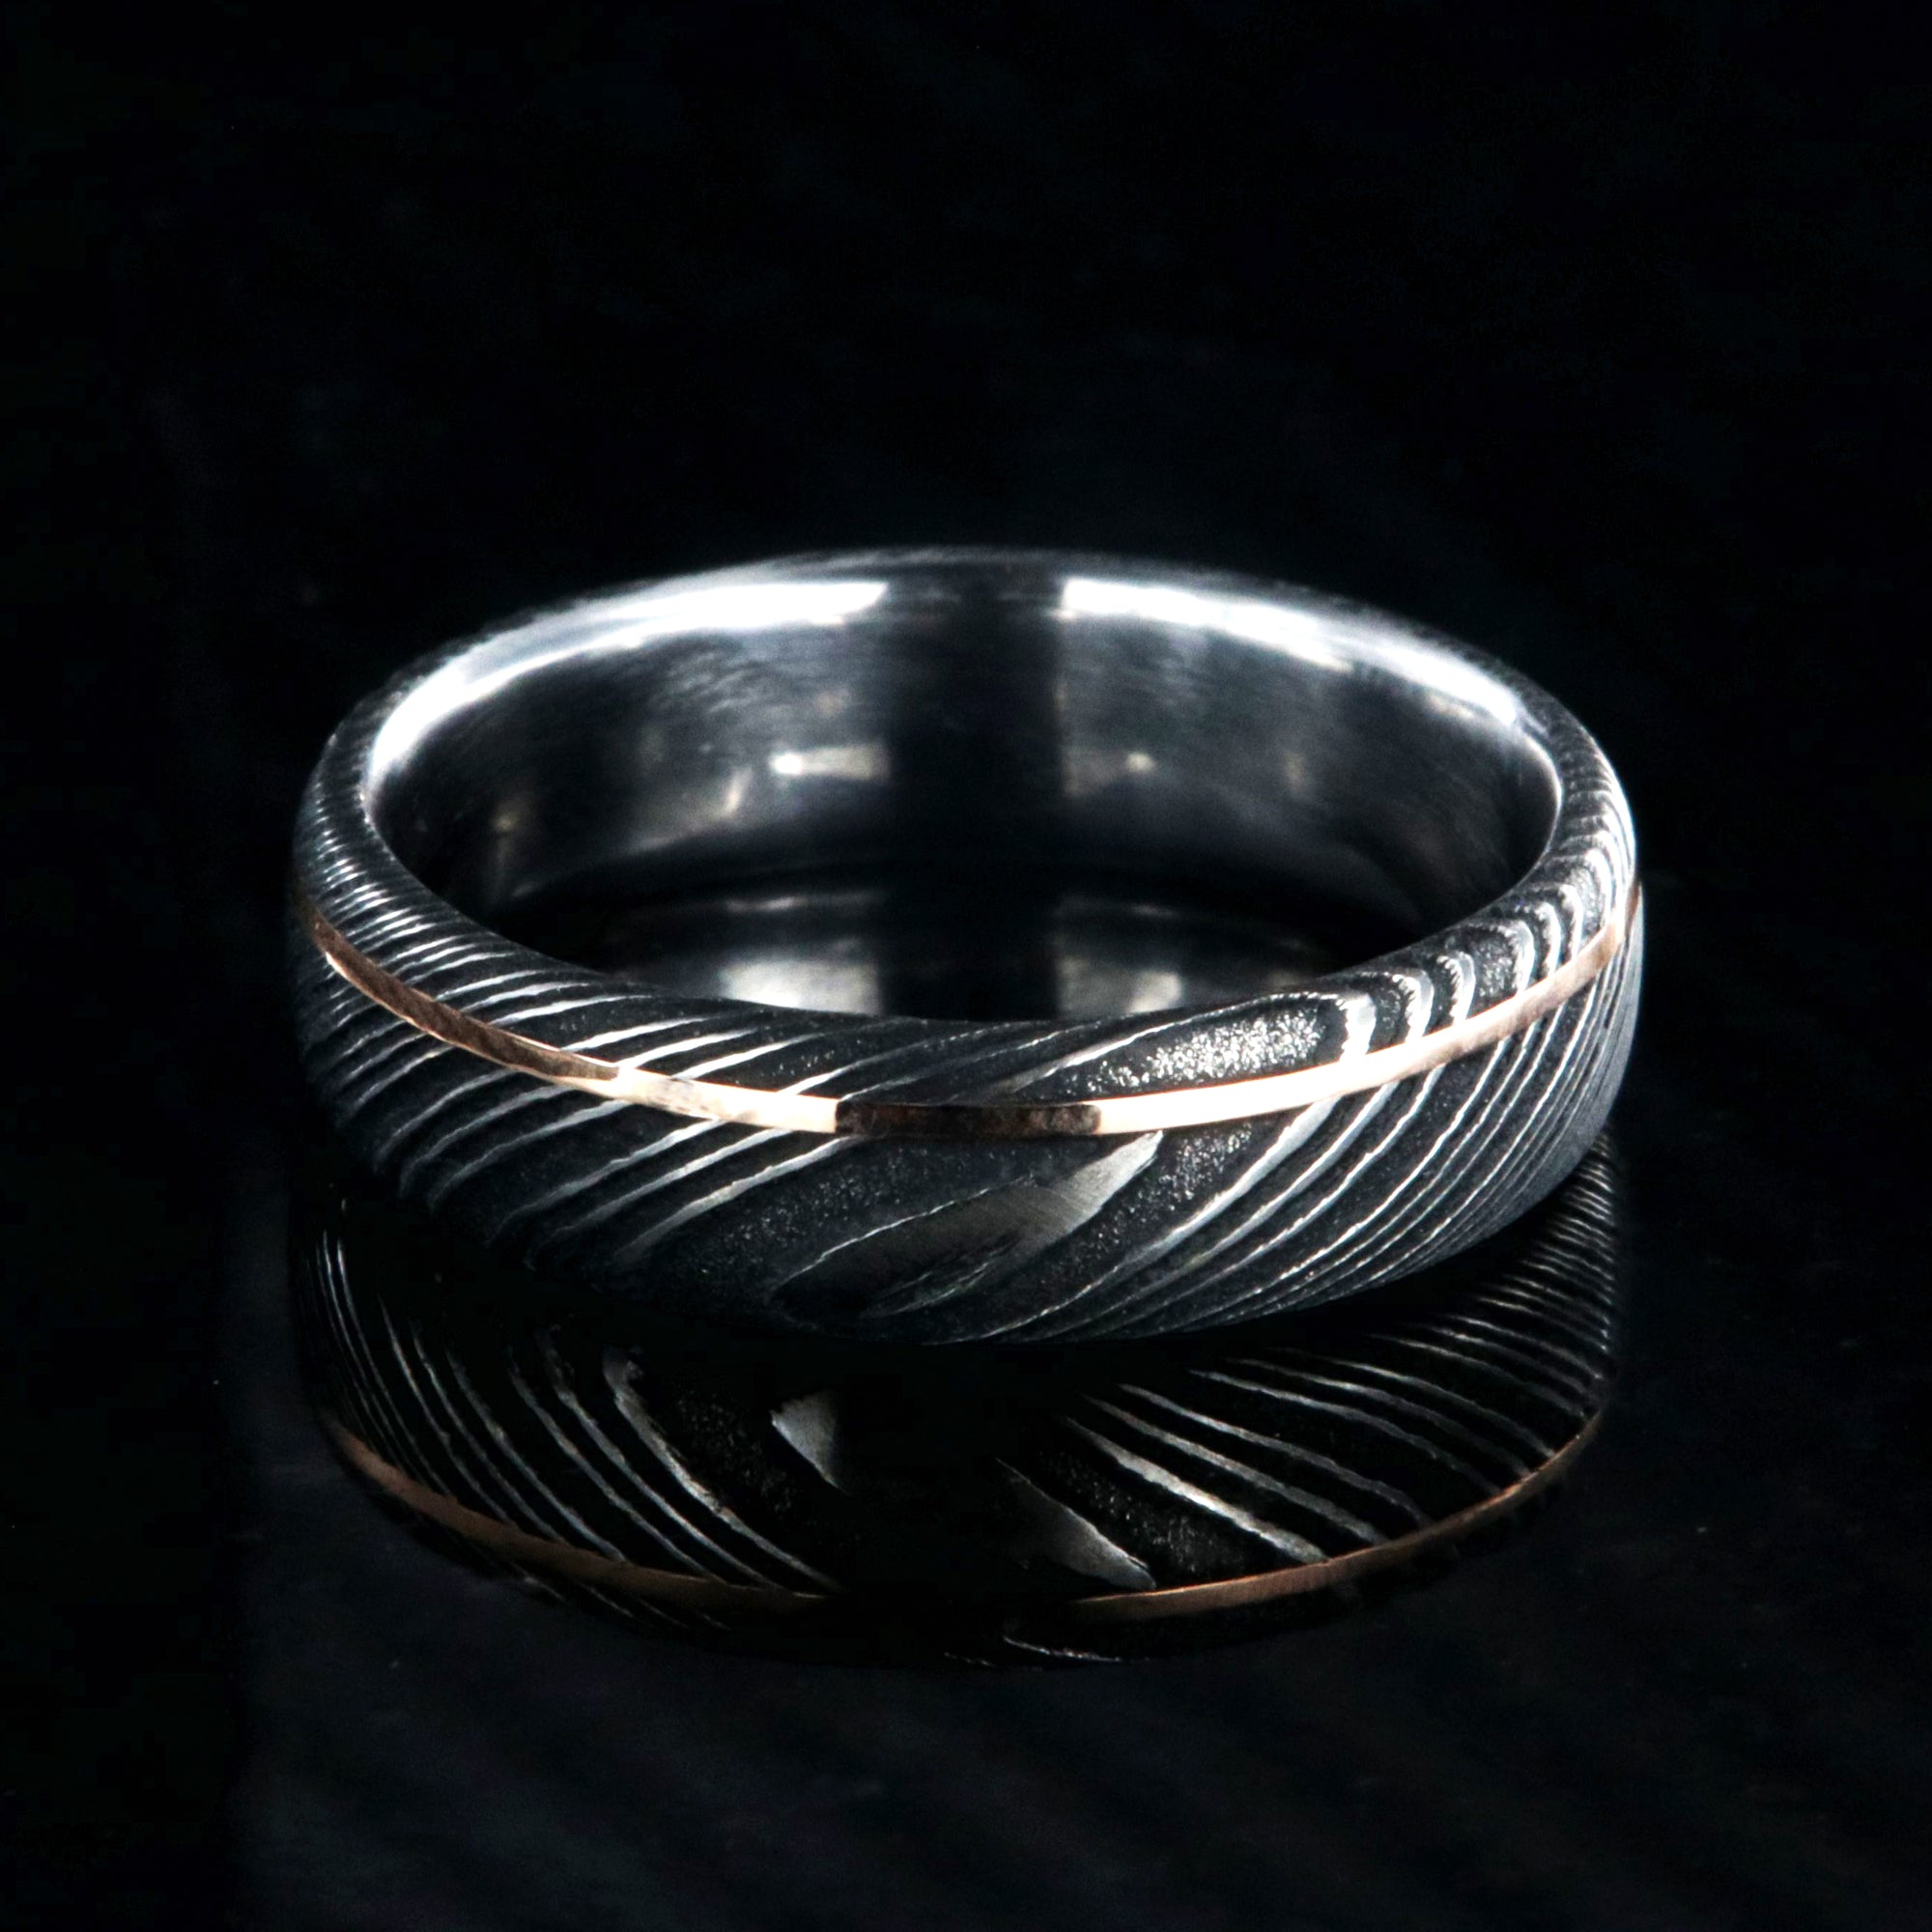 6mm wide black Damascus steel wedding band with rounded profile, polished inside, and ultra-thin off-center rose gold inlay